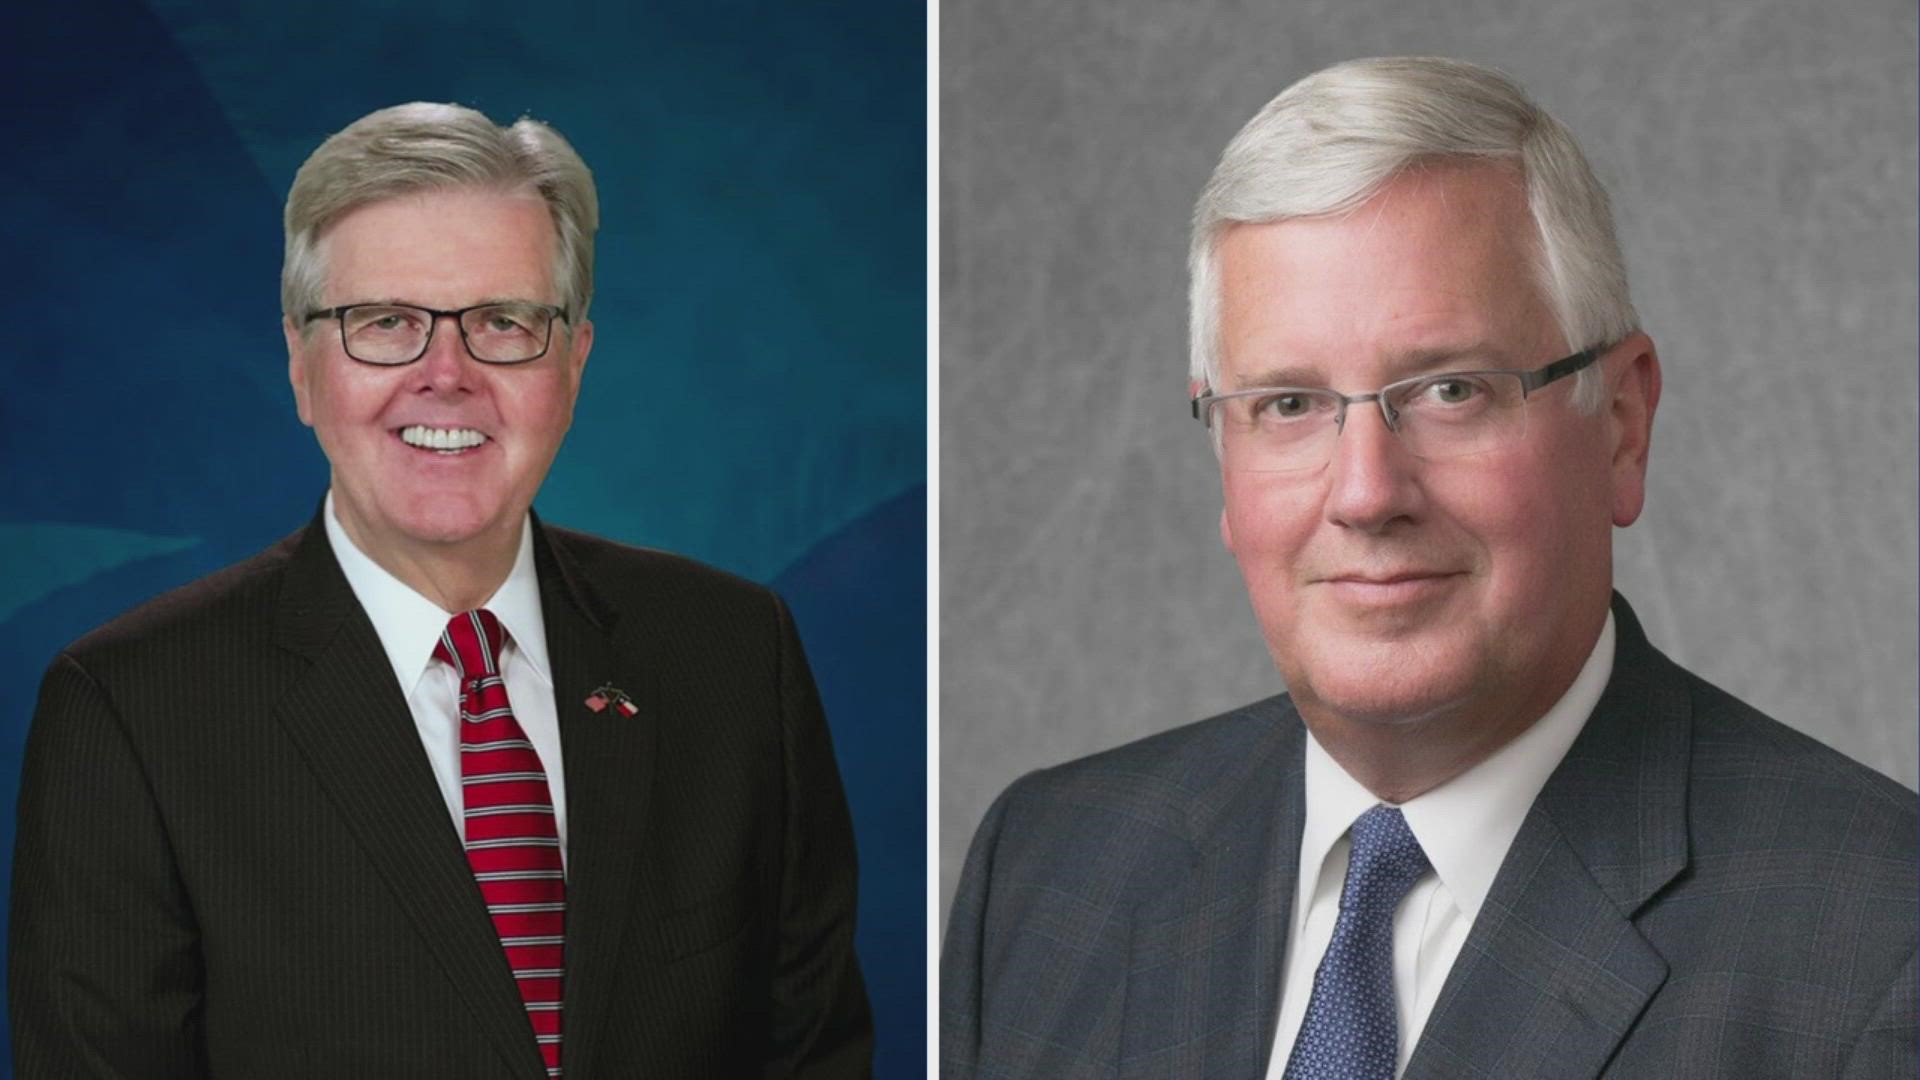 Polling shows Mike Collier, a former oil executive, is within striking distance of Dan Patrick in what could be another close matchup between the two.